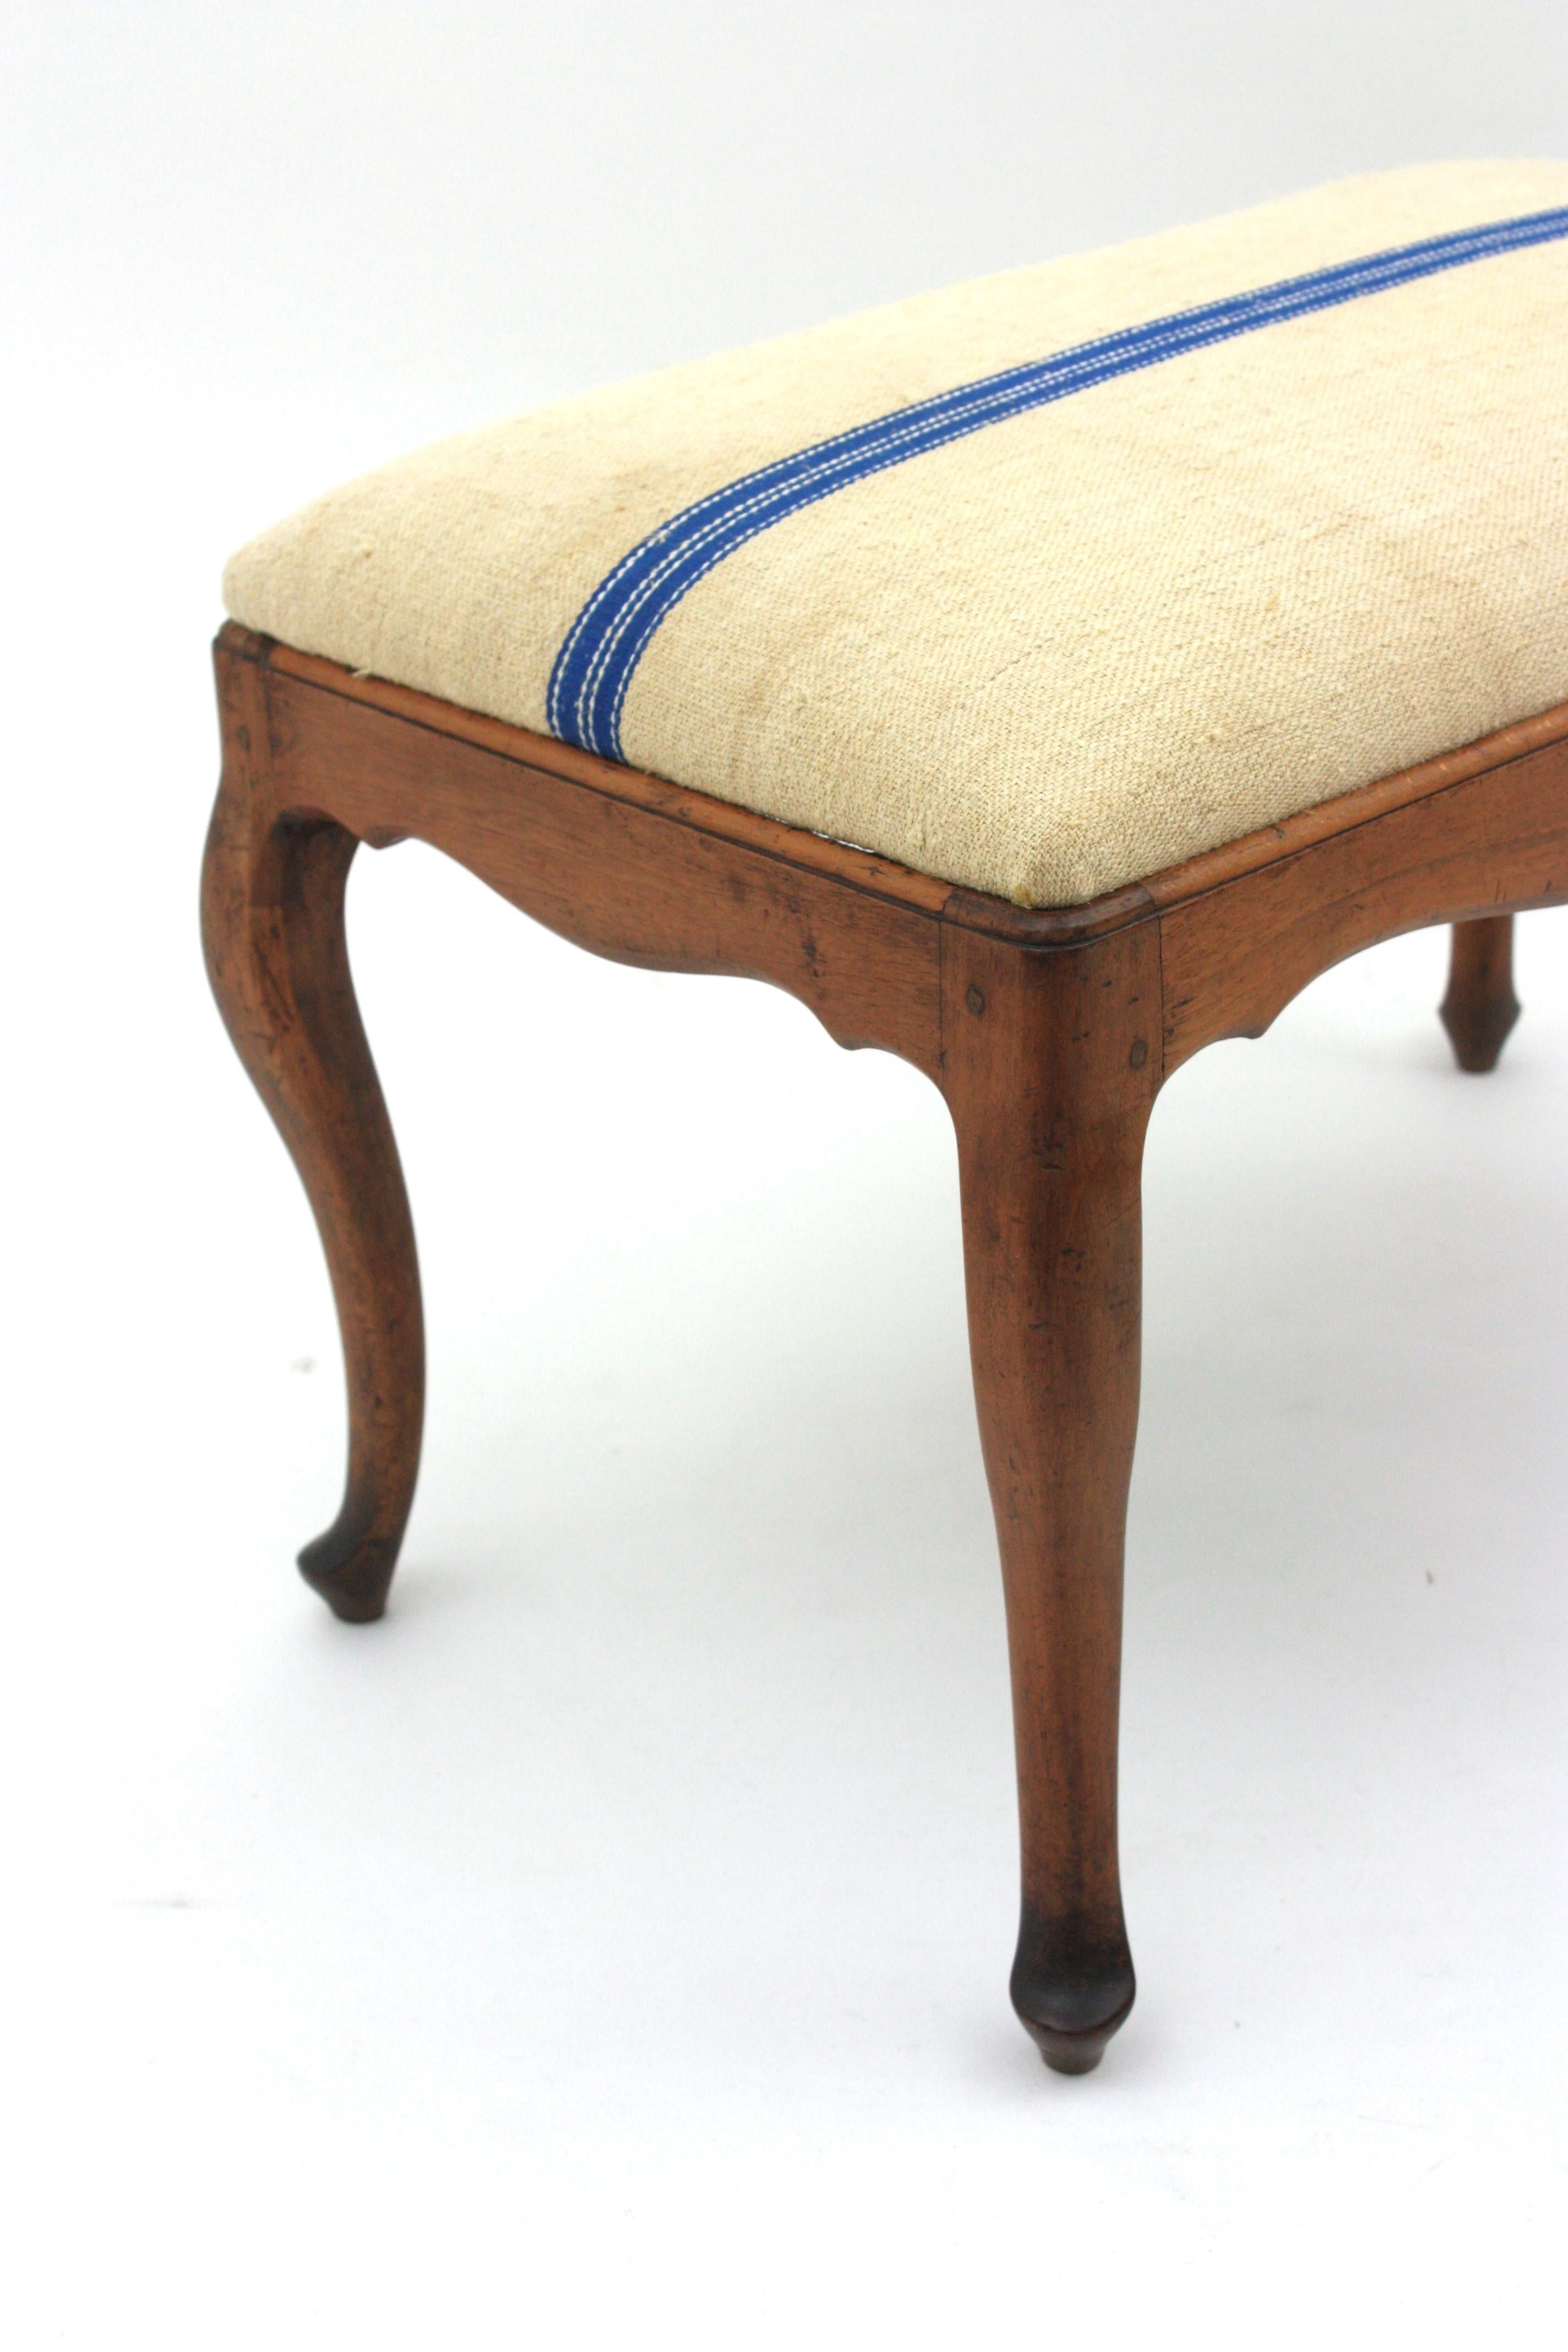 20th Century Bench Ottoman Stool in Walnut New Upholstered in Vintage French Linen For Sale